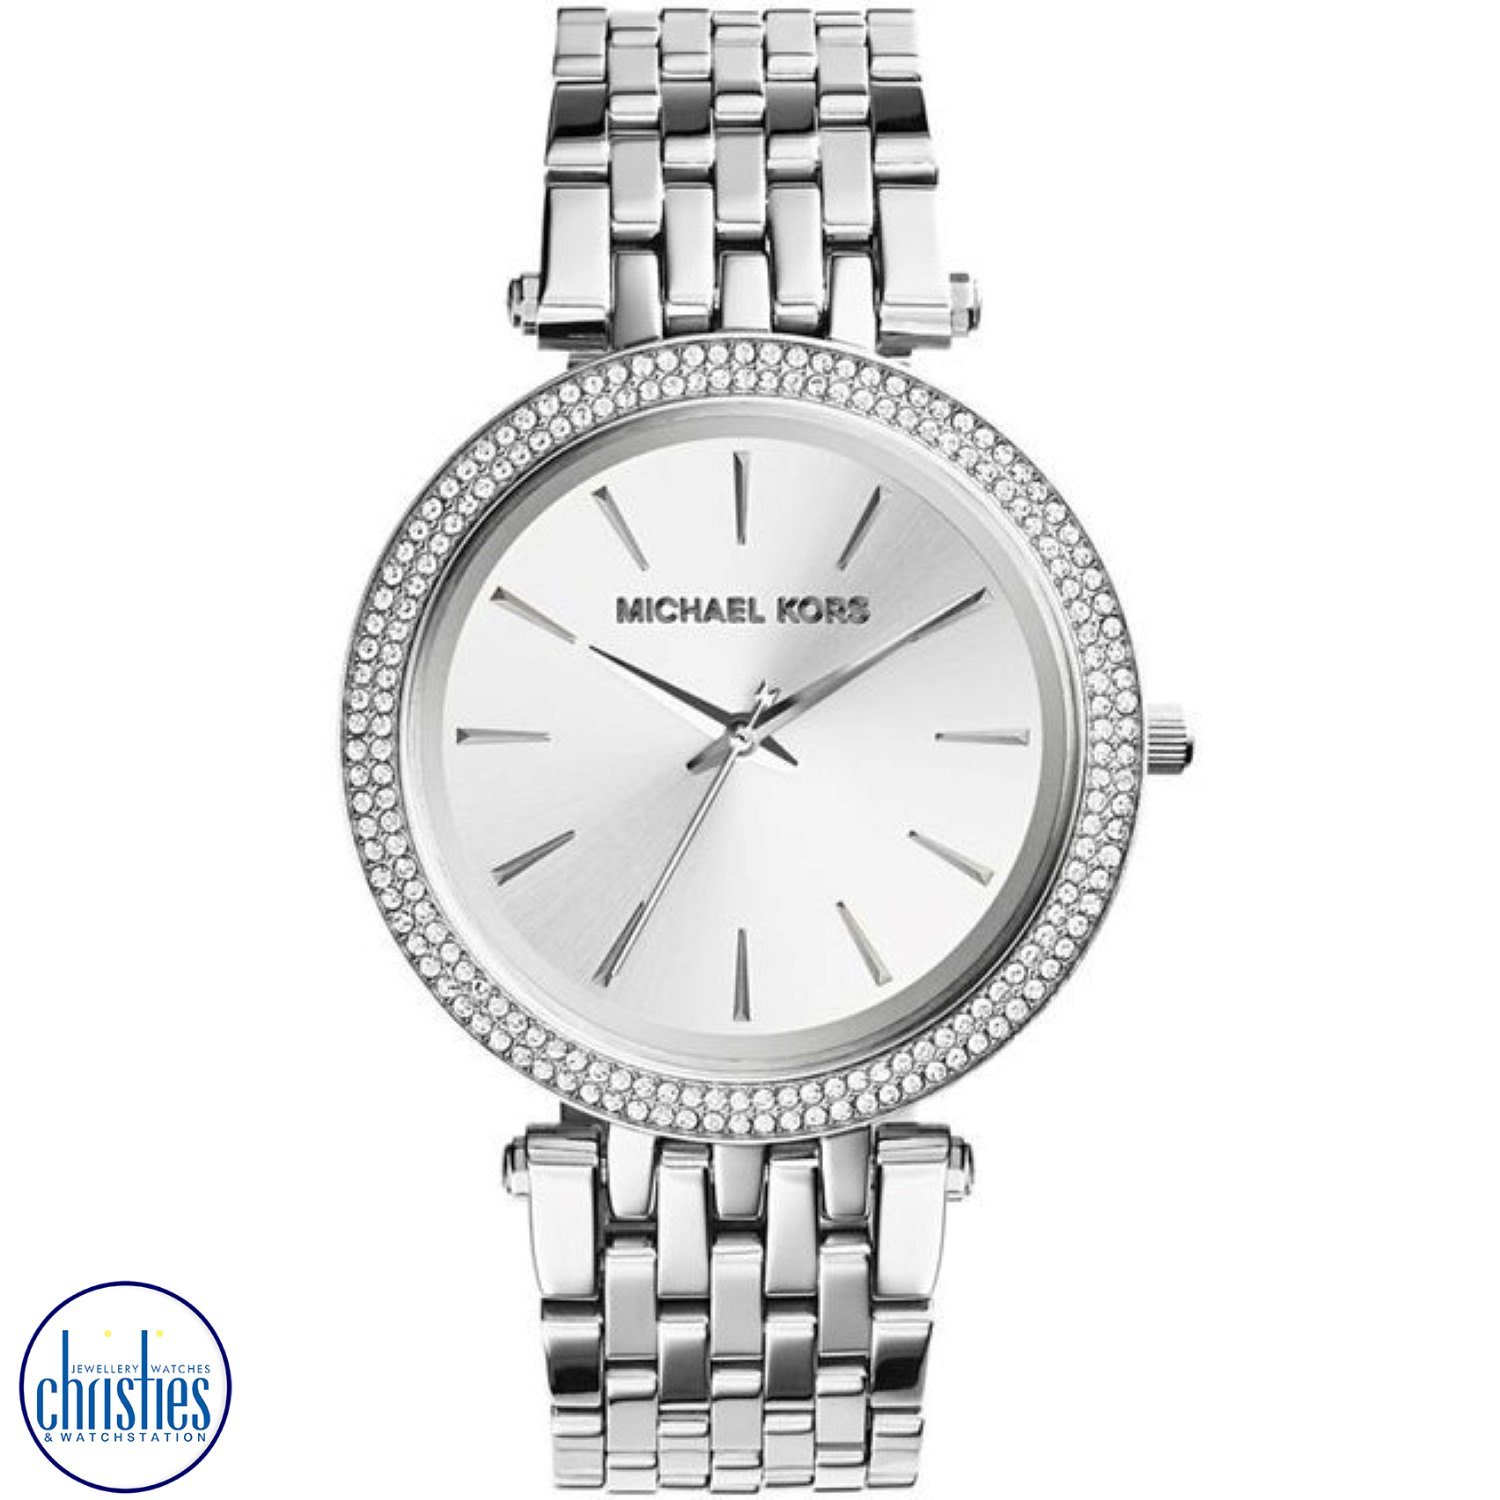 MK3190 Michael Kors Womens Darci Stainless Steel Bracelet Watch. An elegant addition to your collection: a glistening Darci watch from Michael Kors. Now in store at Christies Papatoetoe  OXIPAY - Have it now and pay over 4 fortnightly payments - Interest 